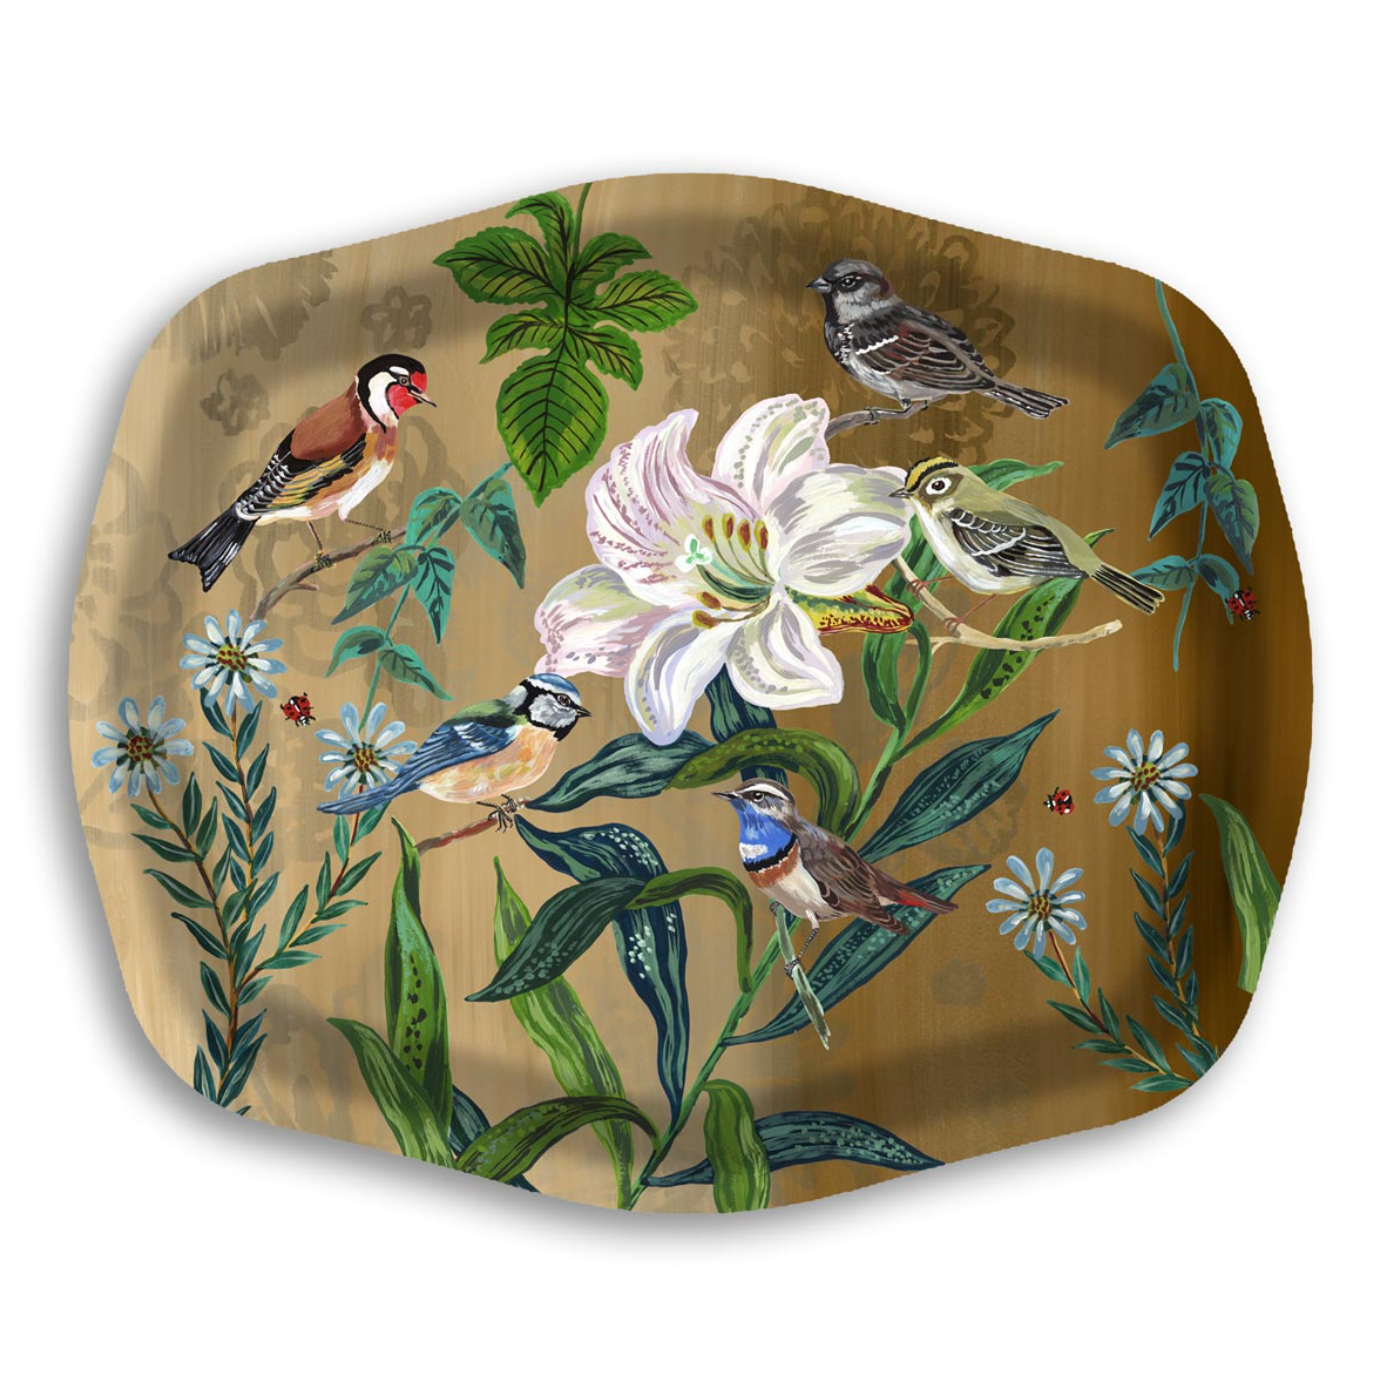 a decorative birchwood tray with birds and flowers on it